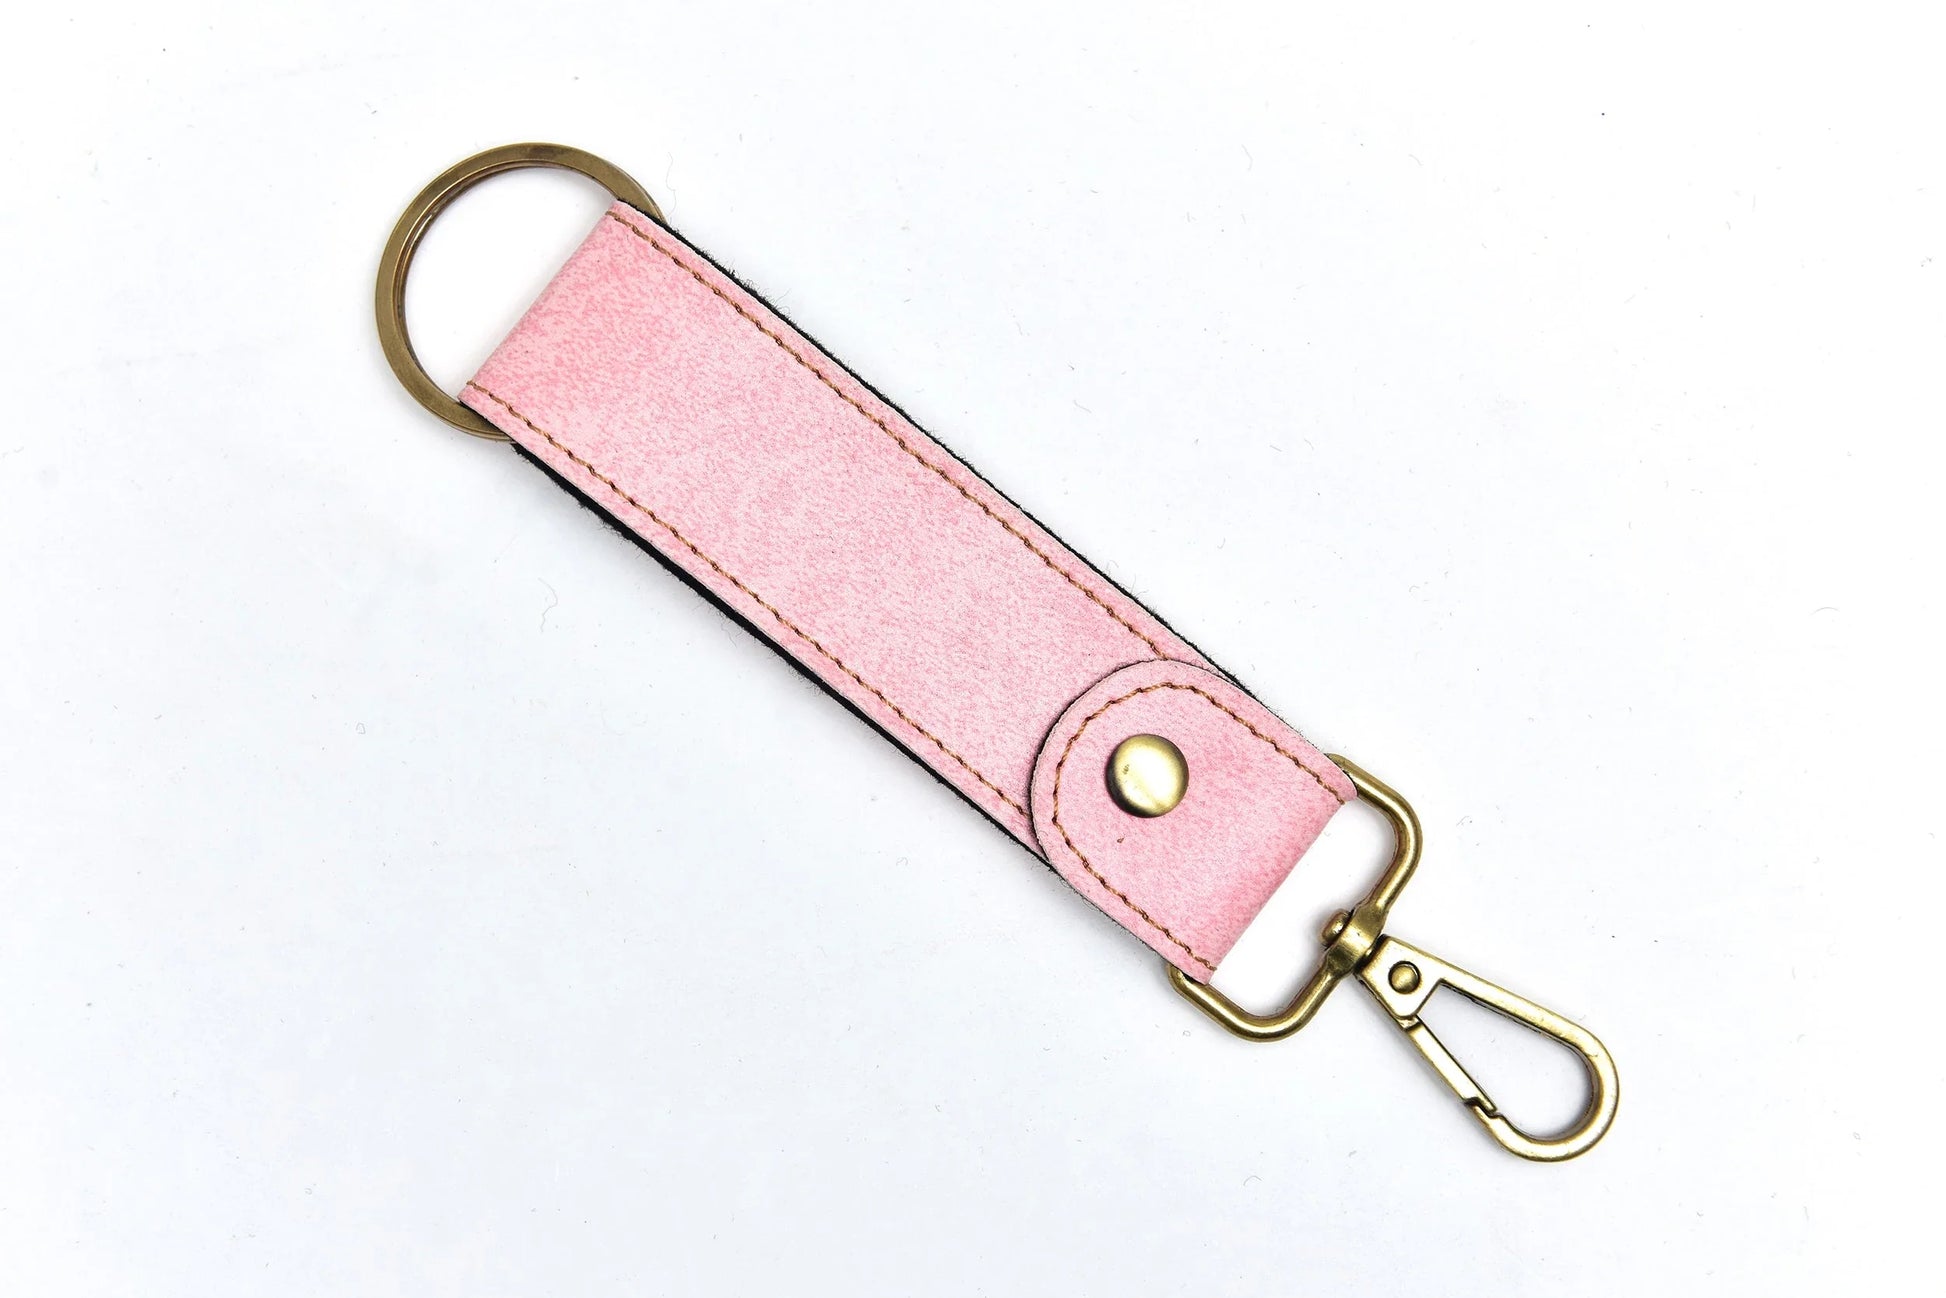 Lightweight and durable, it's the ideal choice for someone who wants a reliable keychain without adding extra weight to their pockets.